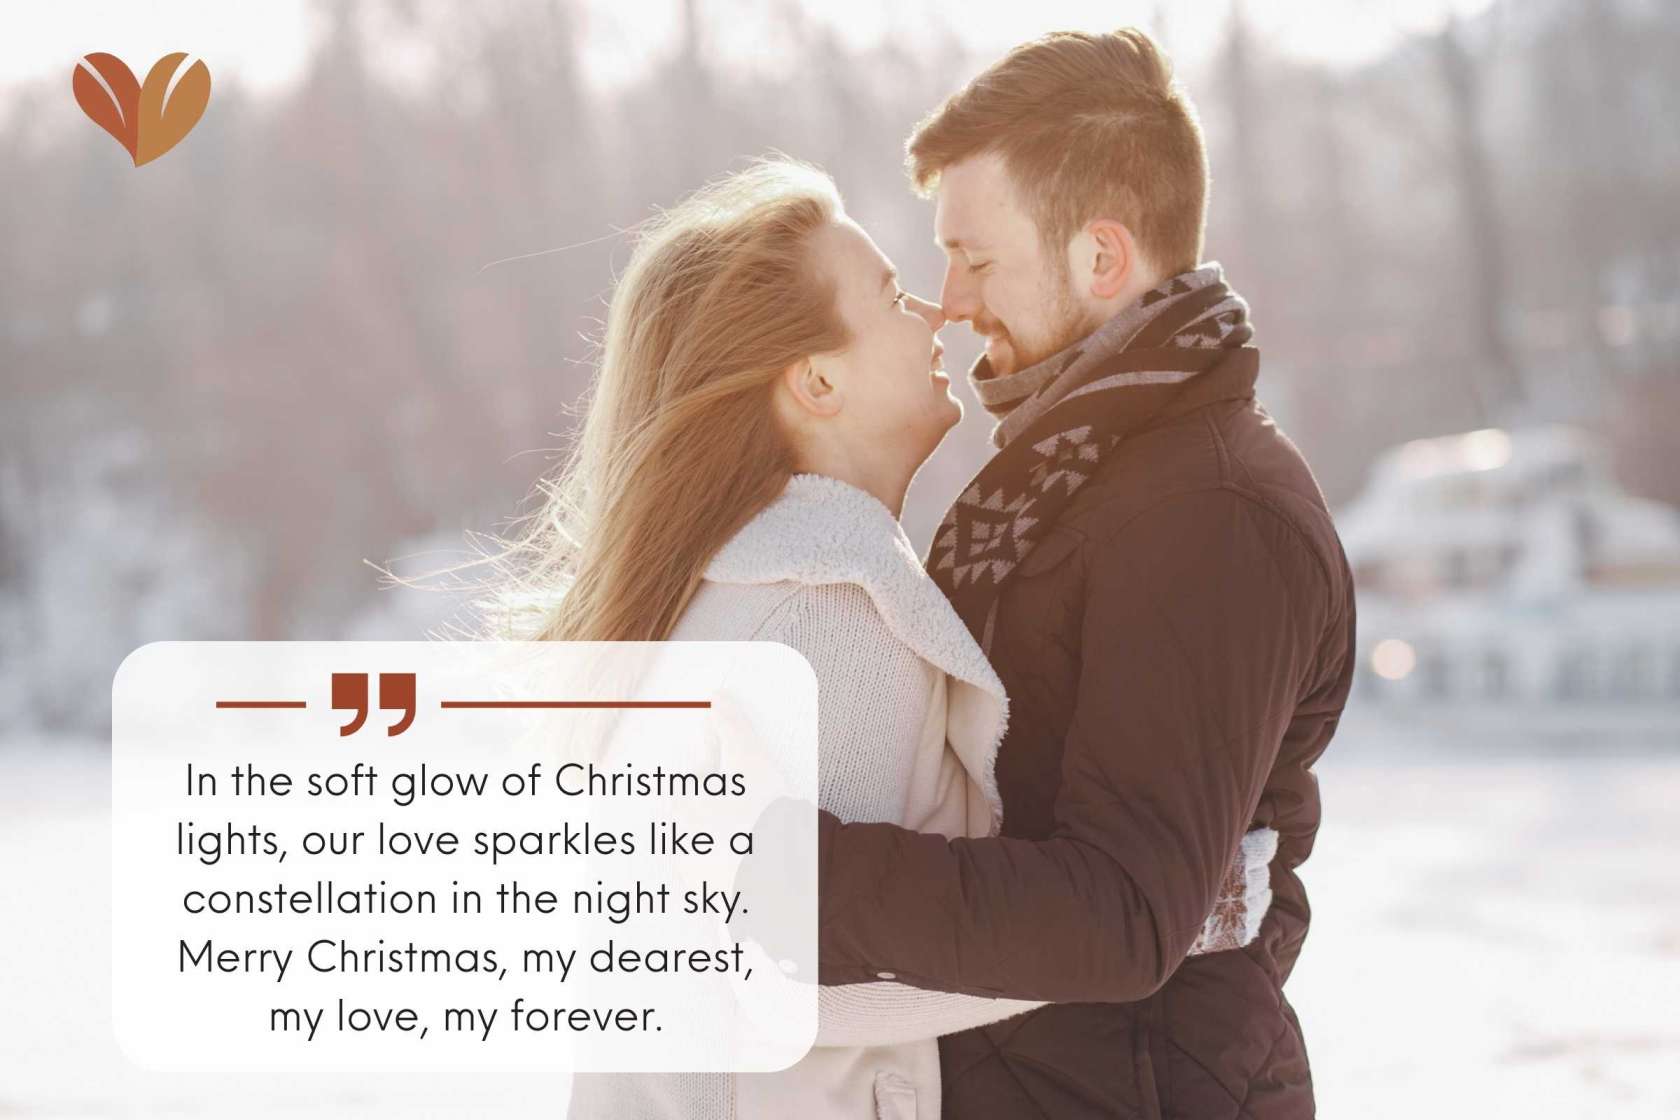 In the soft glow of Christmas lights, our love sparkles like a constellation in the night sky. Merry Christmas, my dearest, my love, my forever.